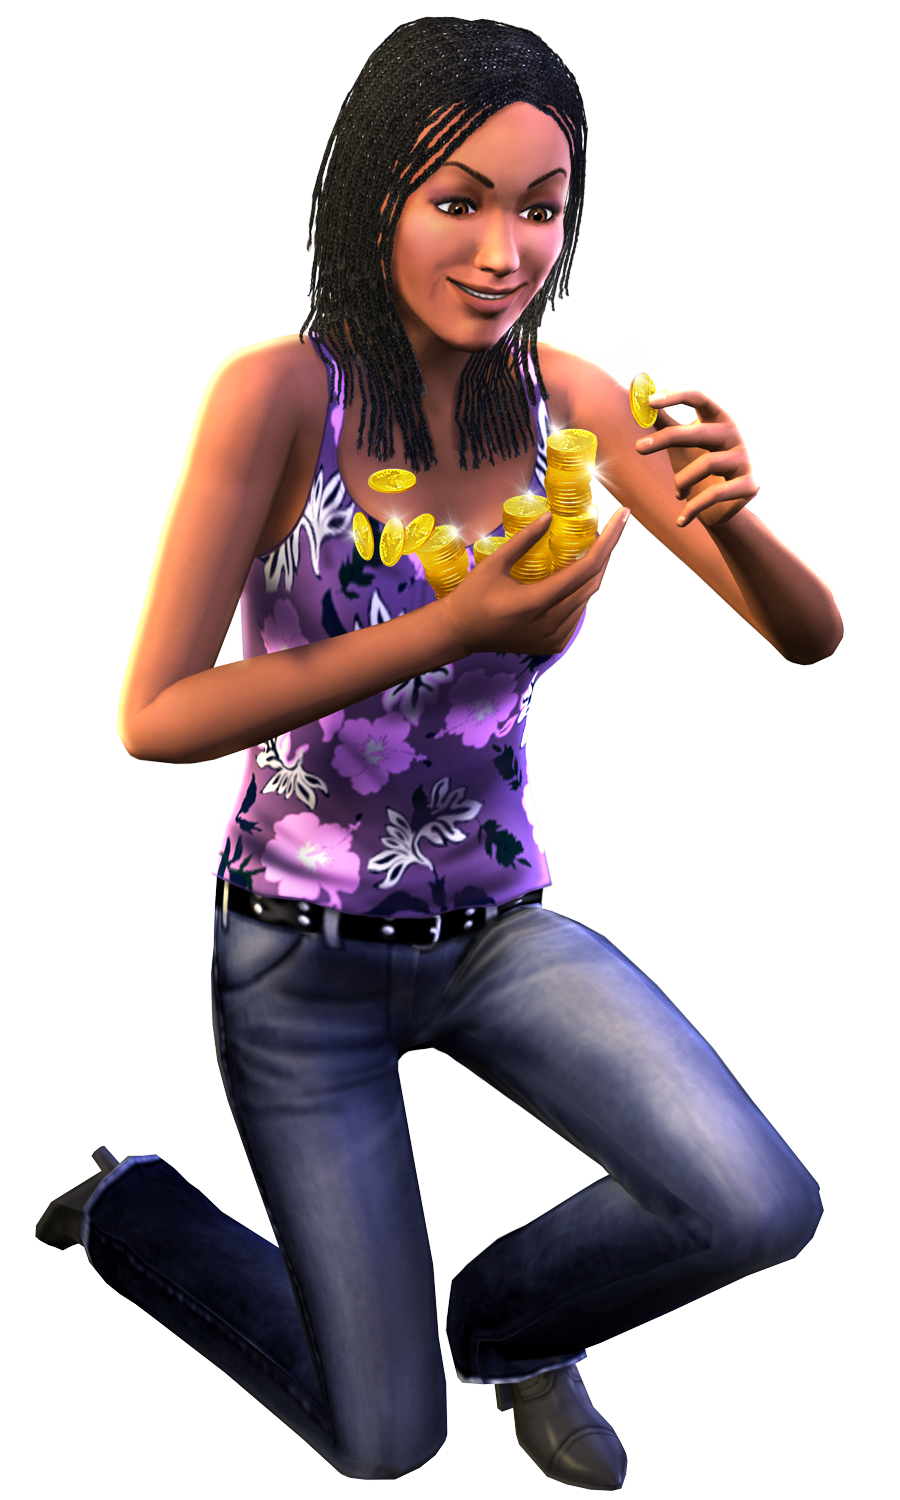 Image - TS3WA Render 4.png | The Sims Wiki | FANDOM powered by Wikia